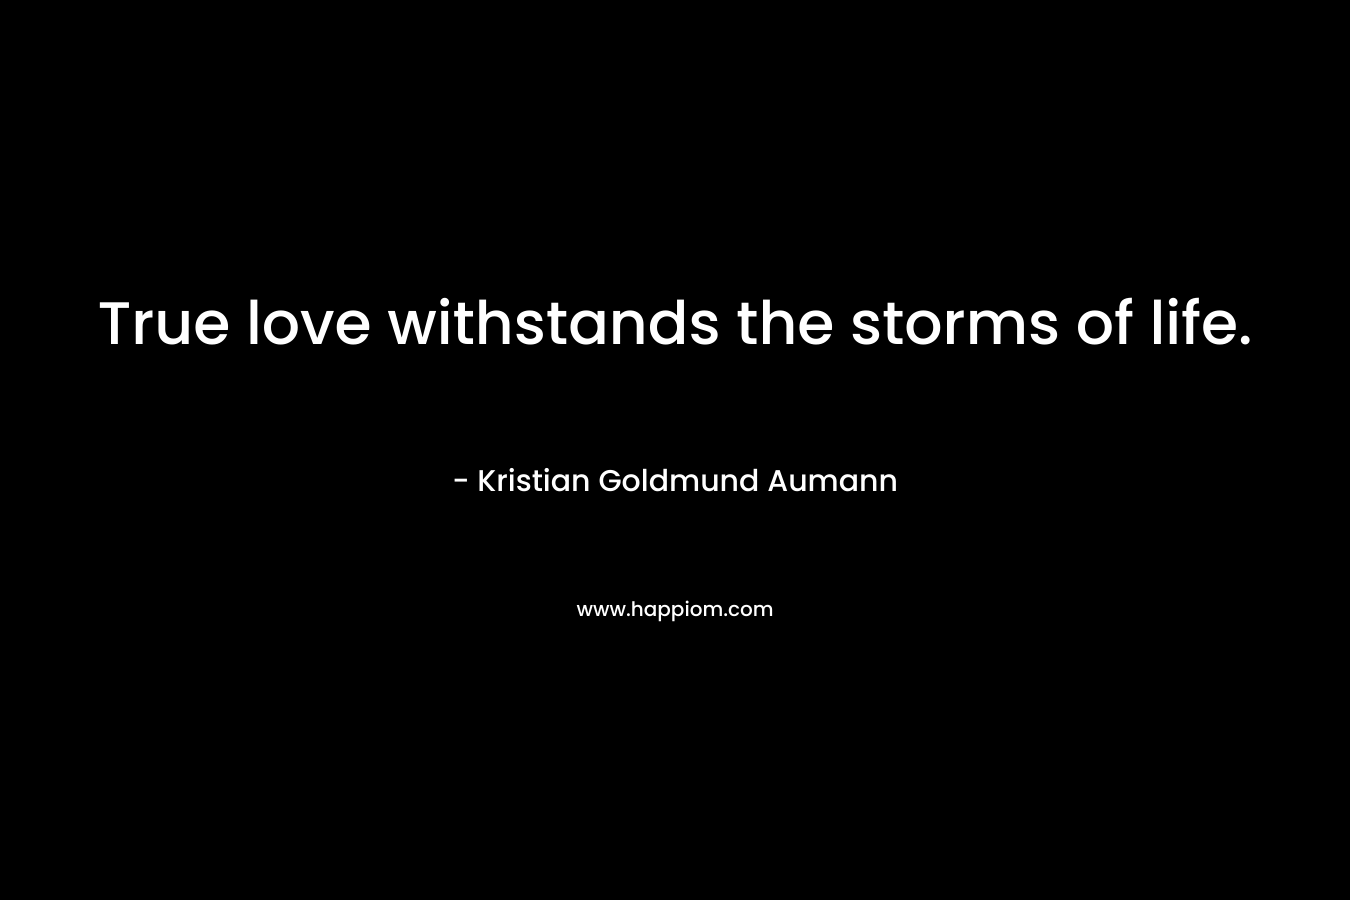 True love withstands the storms of life. – Kristian Goldmund Aumann